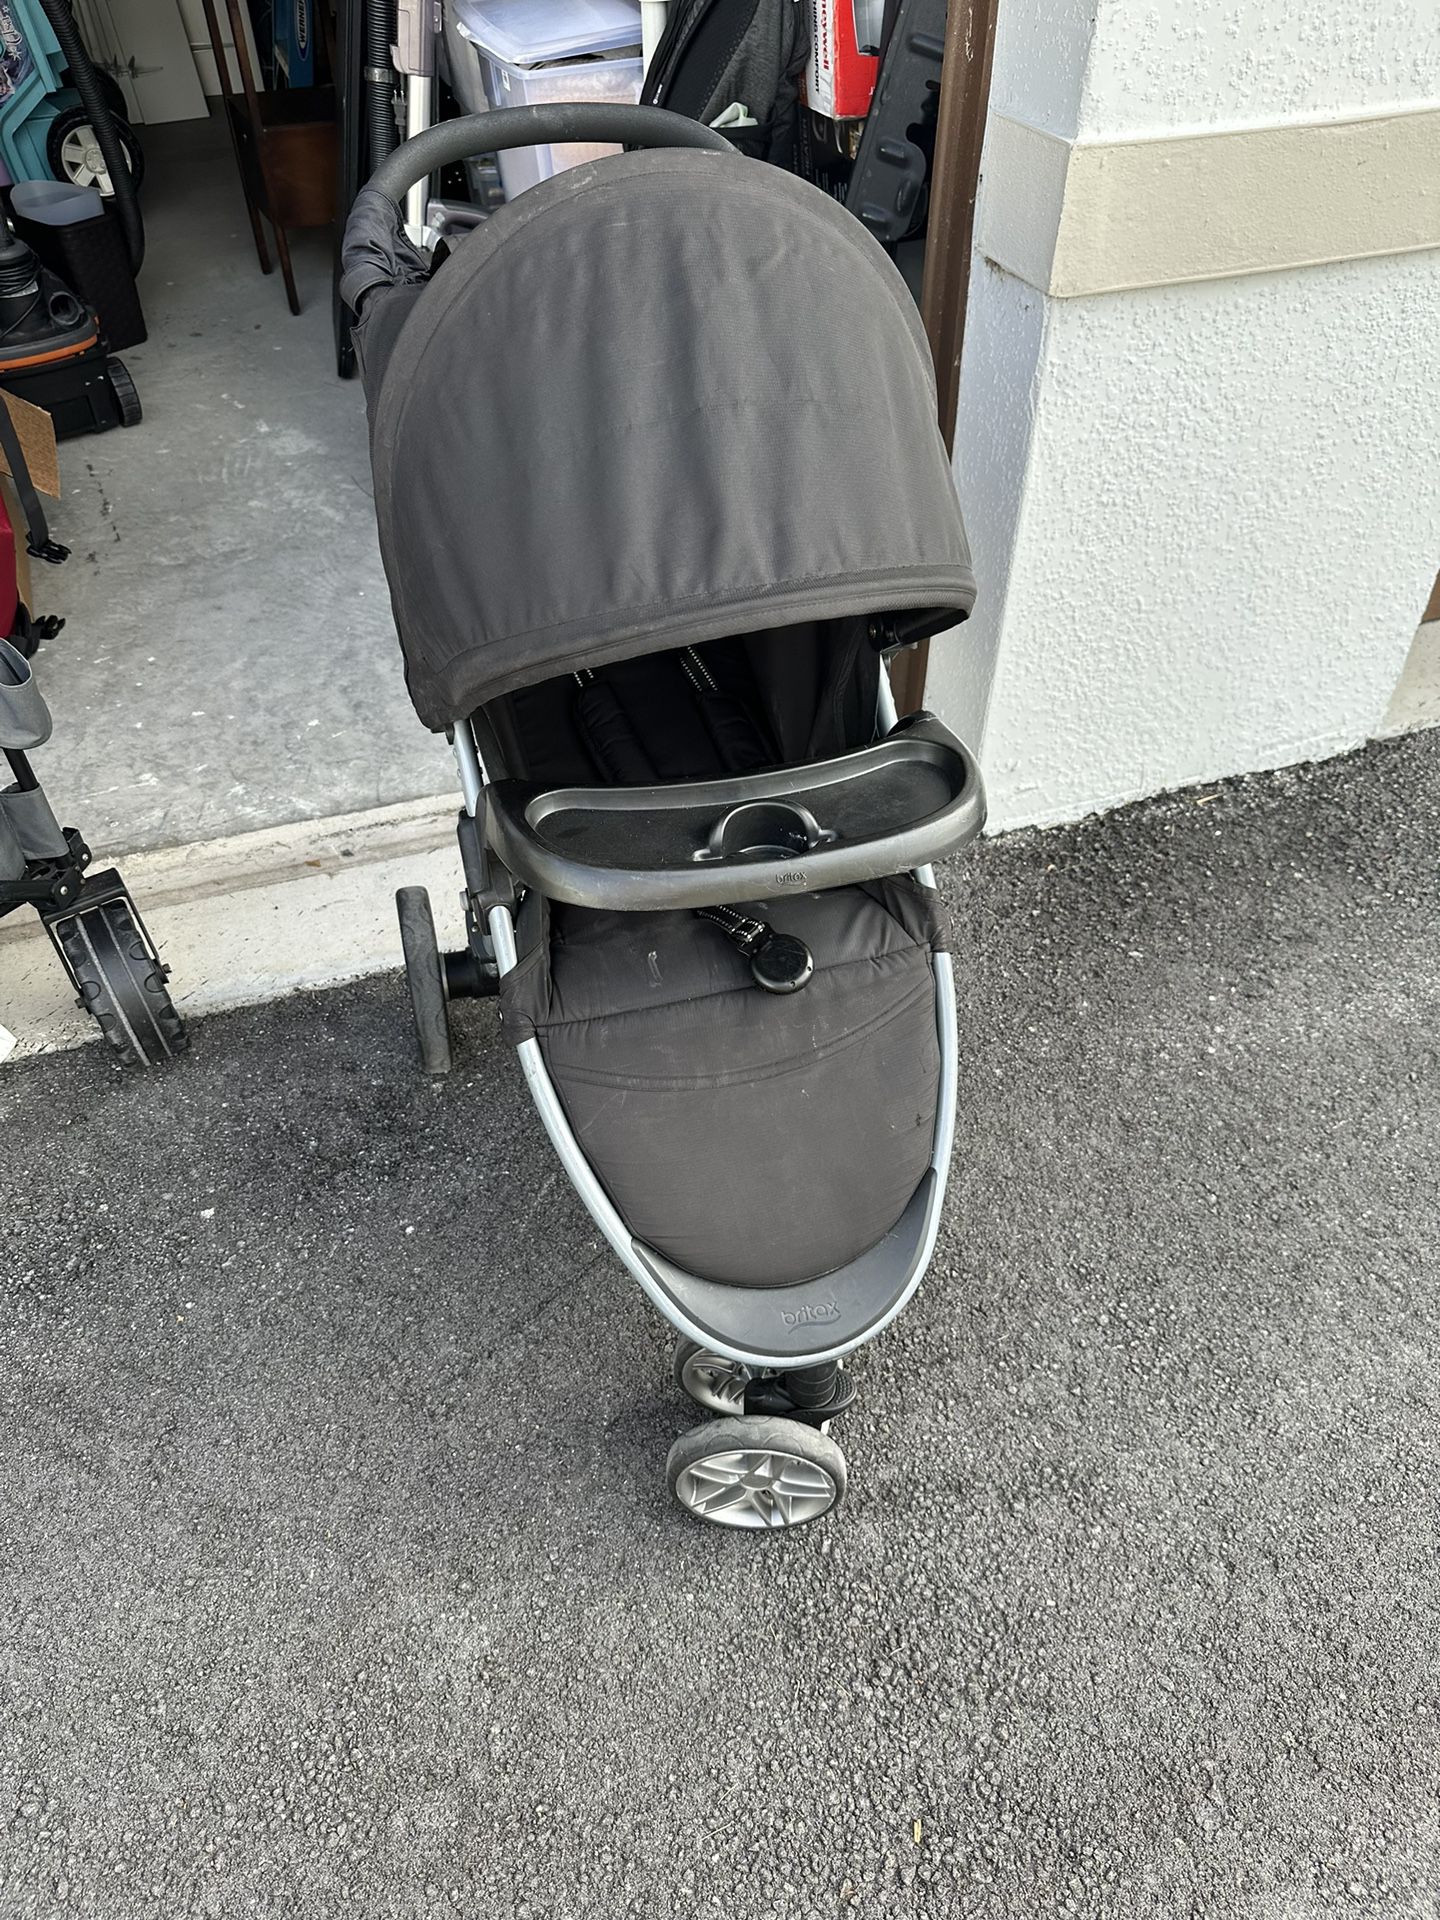 Britax Stroller With Carrier Attachments 